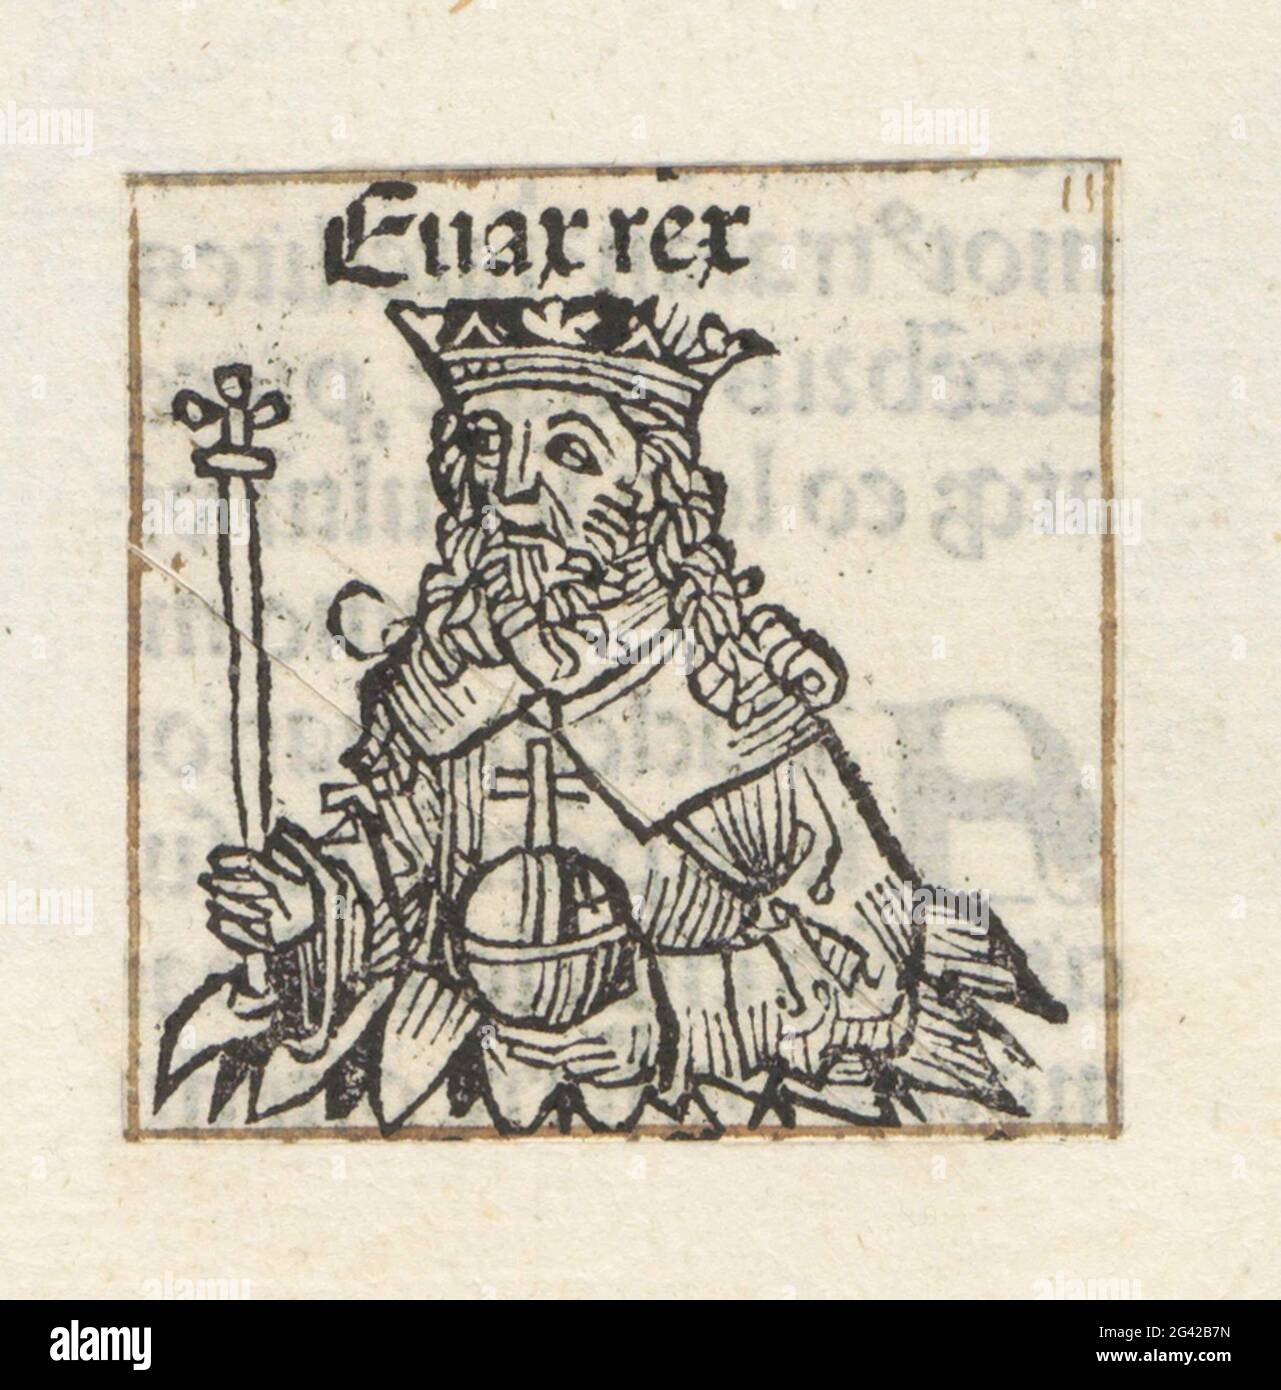 King Evax; Evax Rex; Liber chronicarum. A flower celk with a king. In his  hands he has a scepter and a migration. The text identifies him as a King  Evax, king of